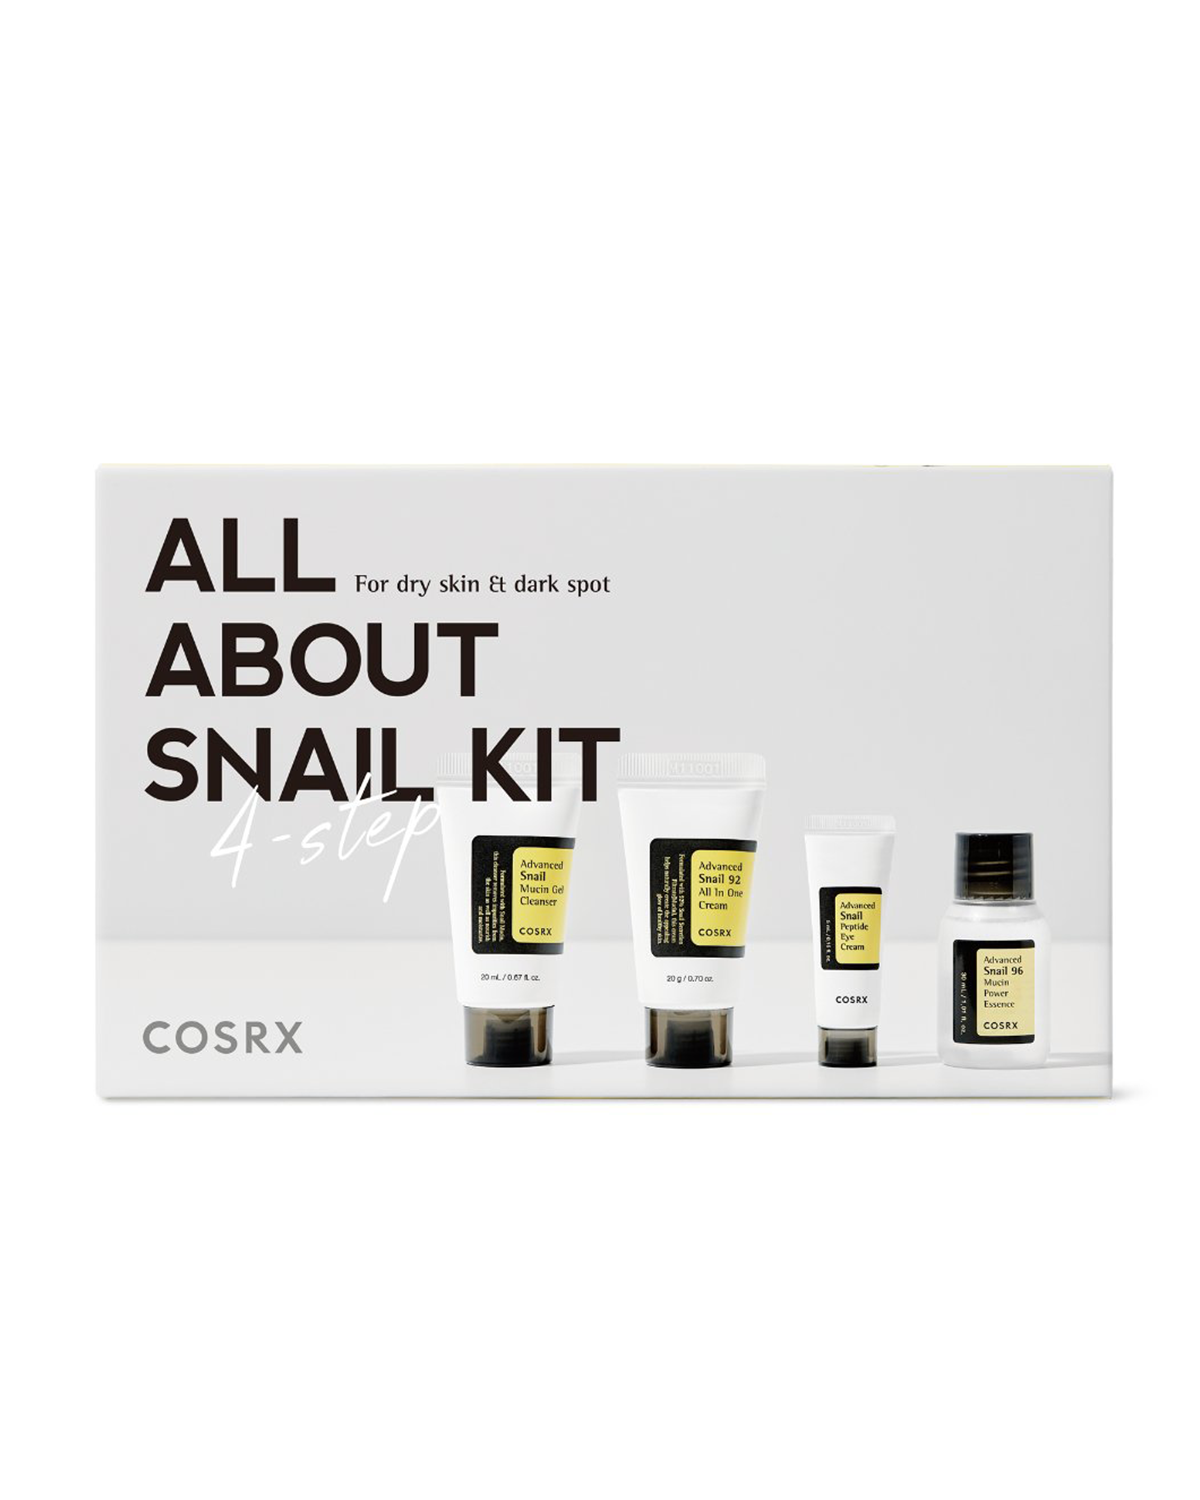 COSRX All About Snail Kit (4 step)